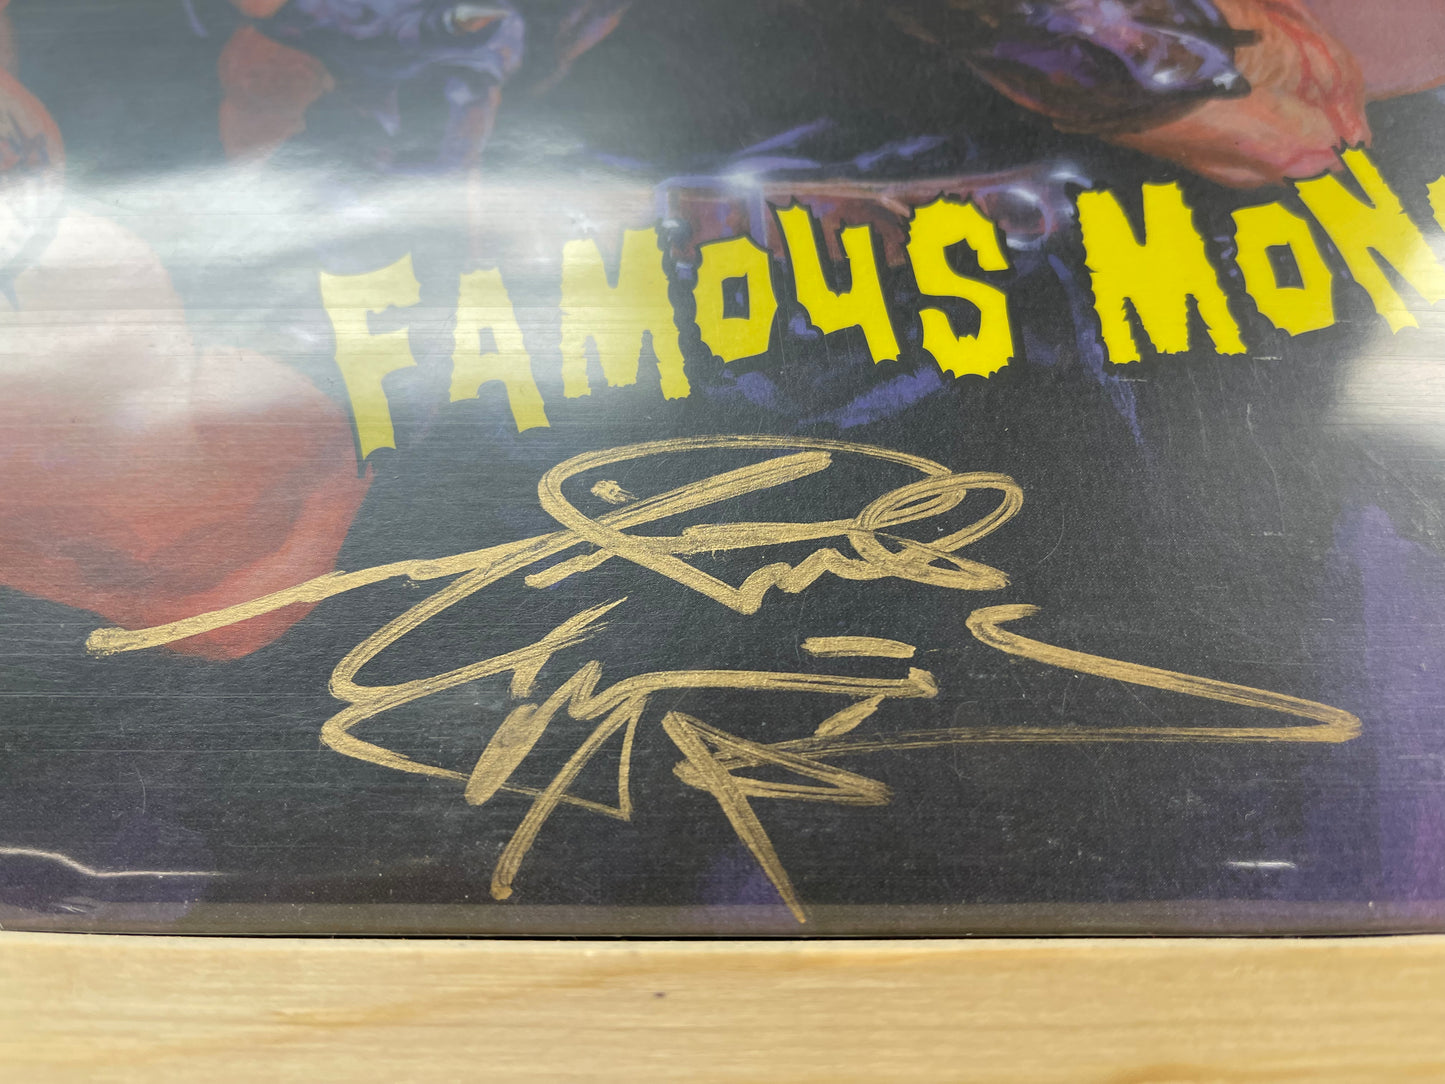 Misfits - Famous Monsters (2018, EU Music On Vinyl, Green, Numbered, *Autographed*)